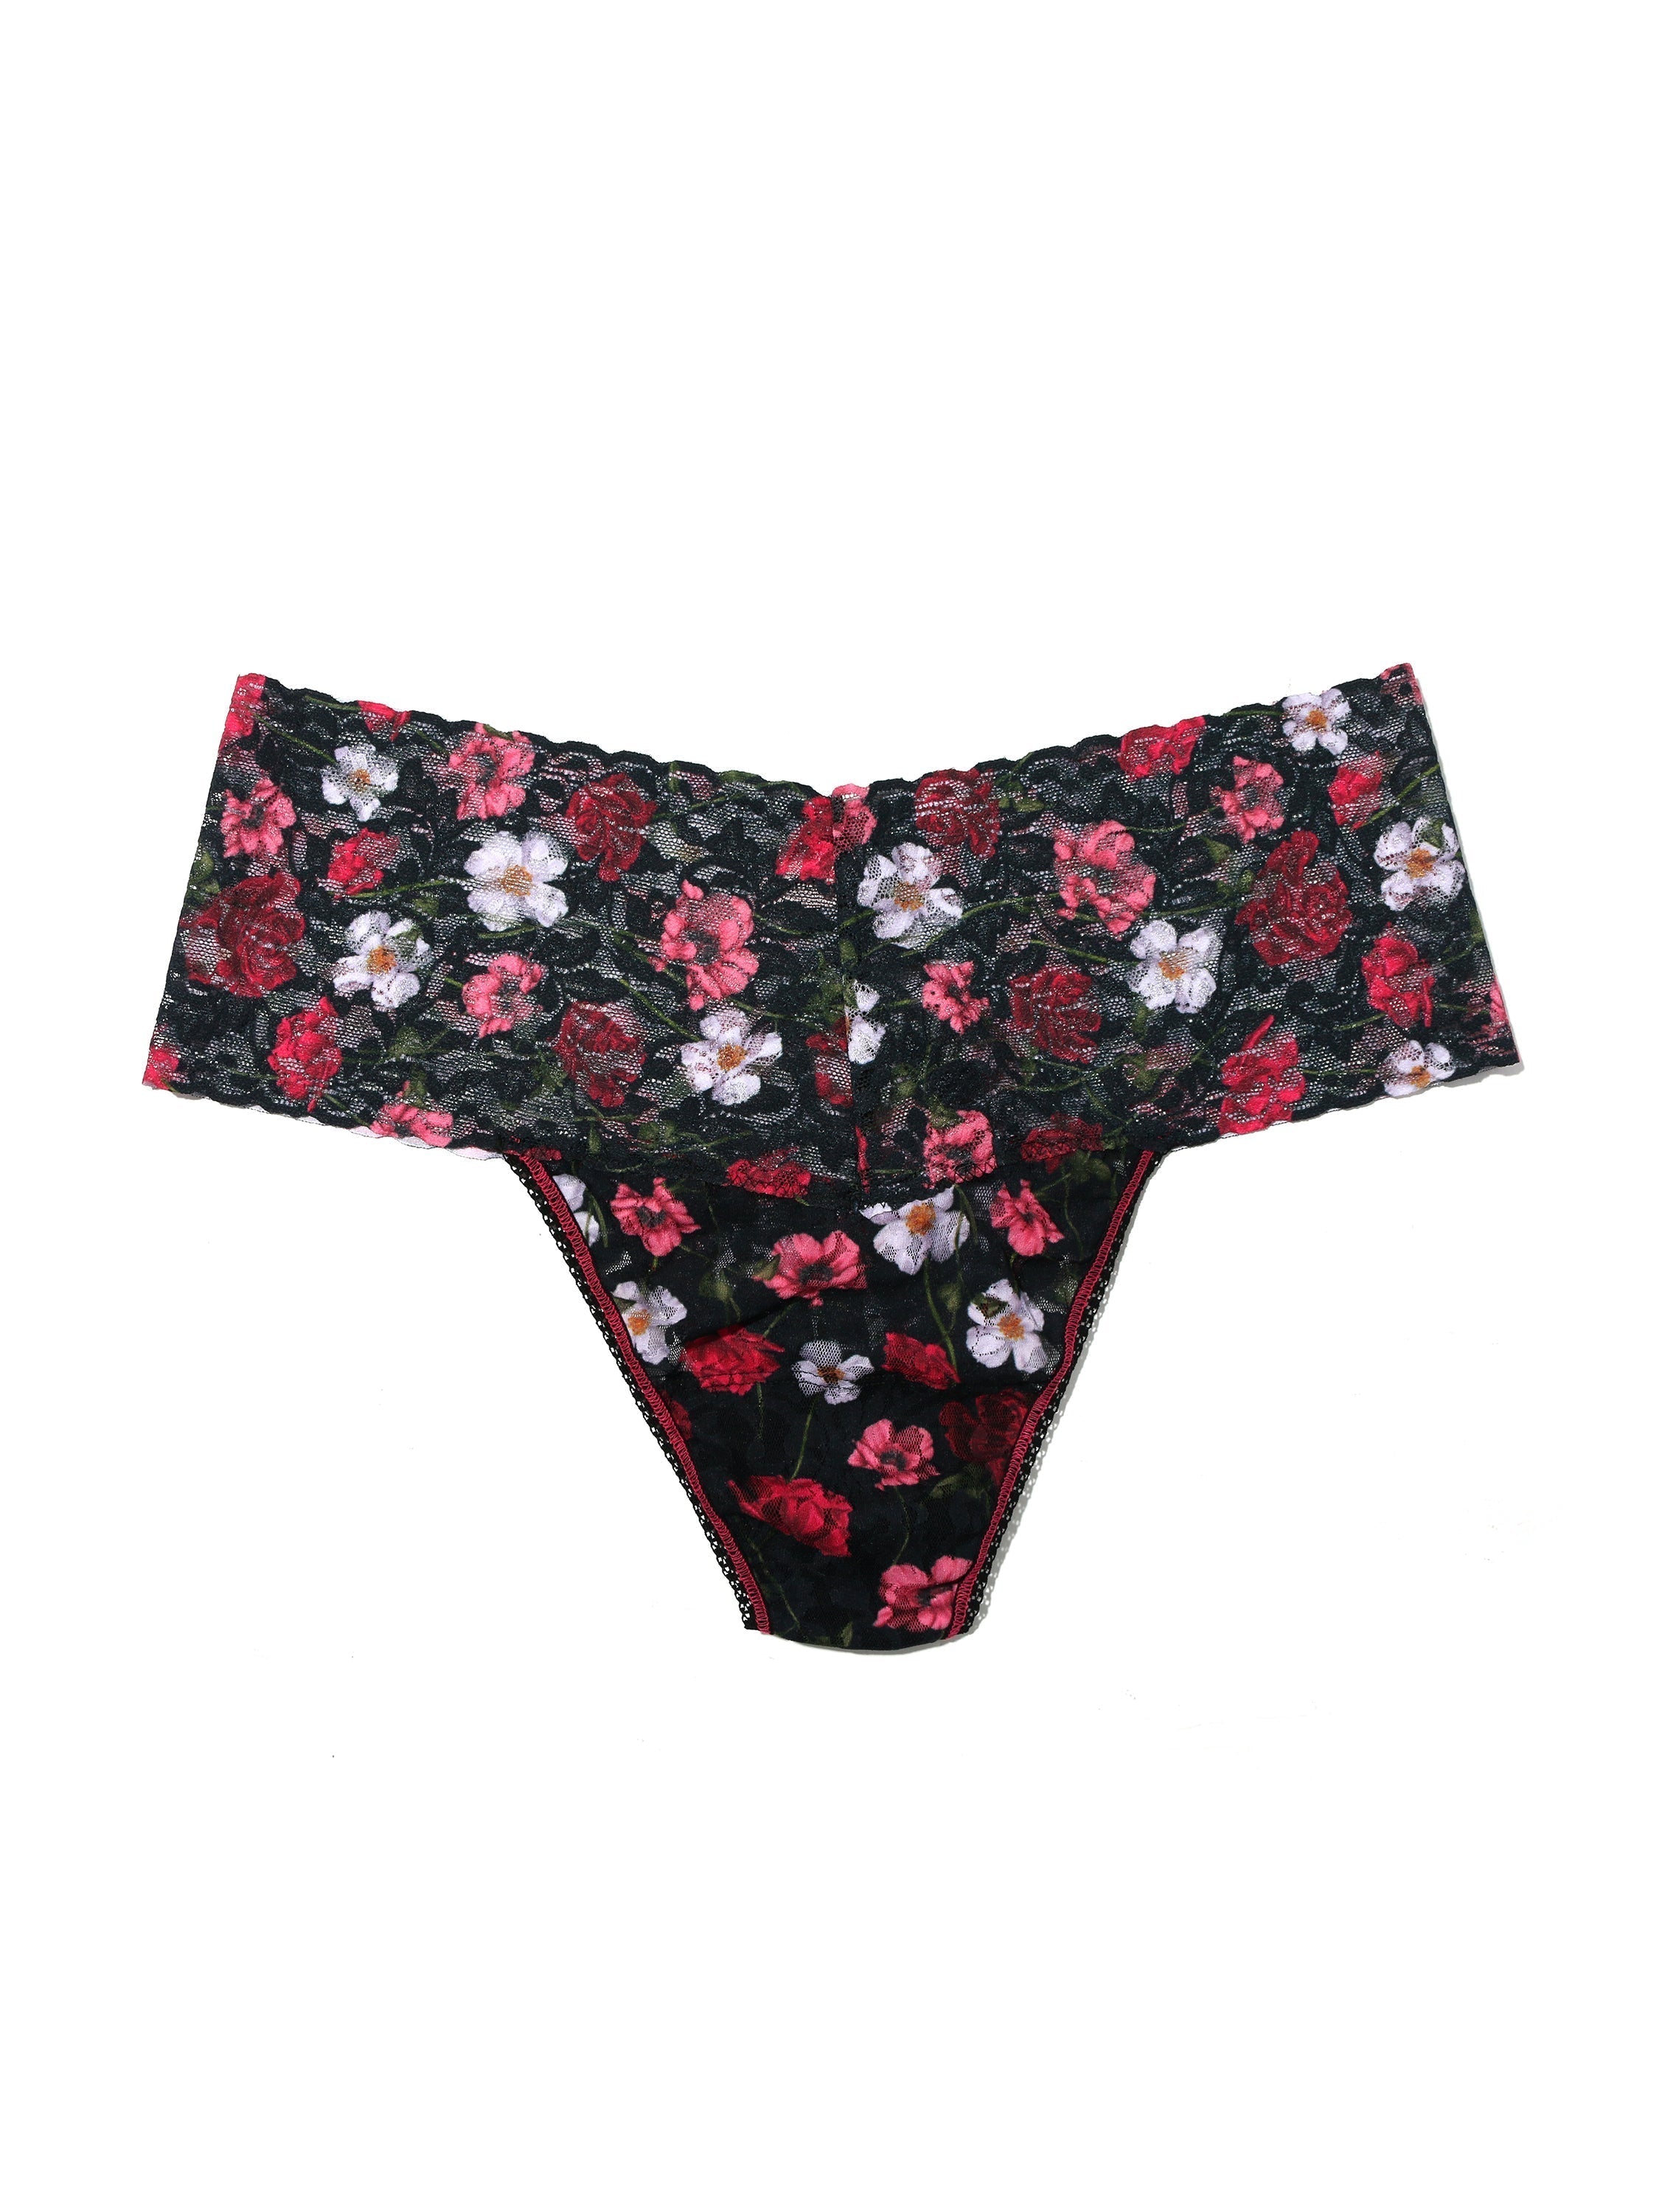  hanky panky Signature Lace Printed Retro Thong One Size, Am I  Dreaming : Clothing, Shoes & Jewelry